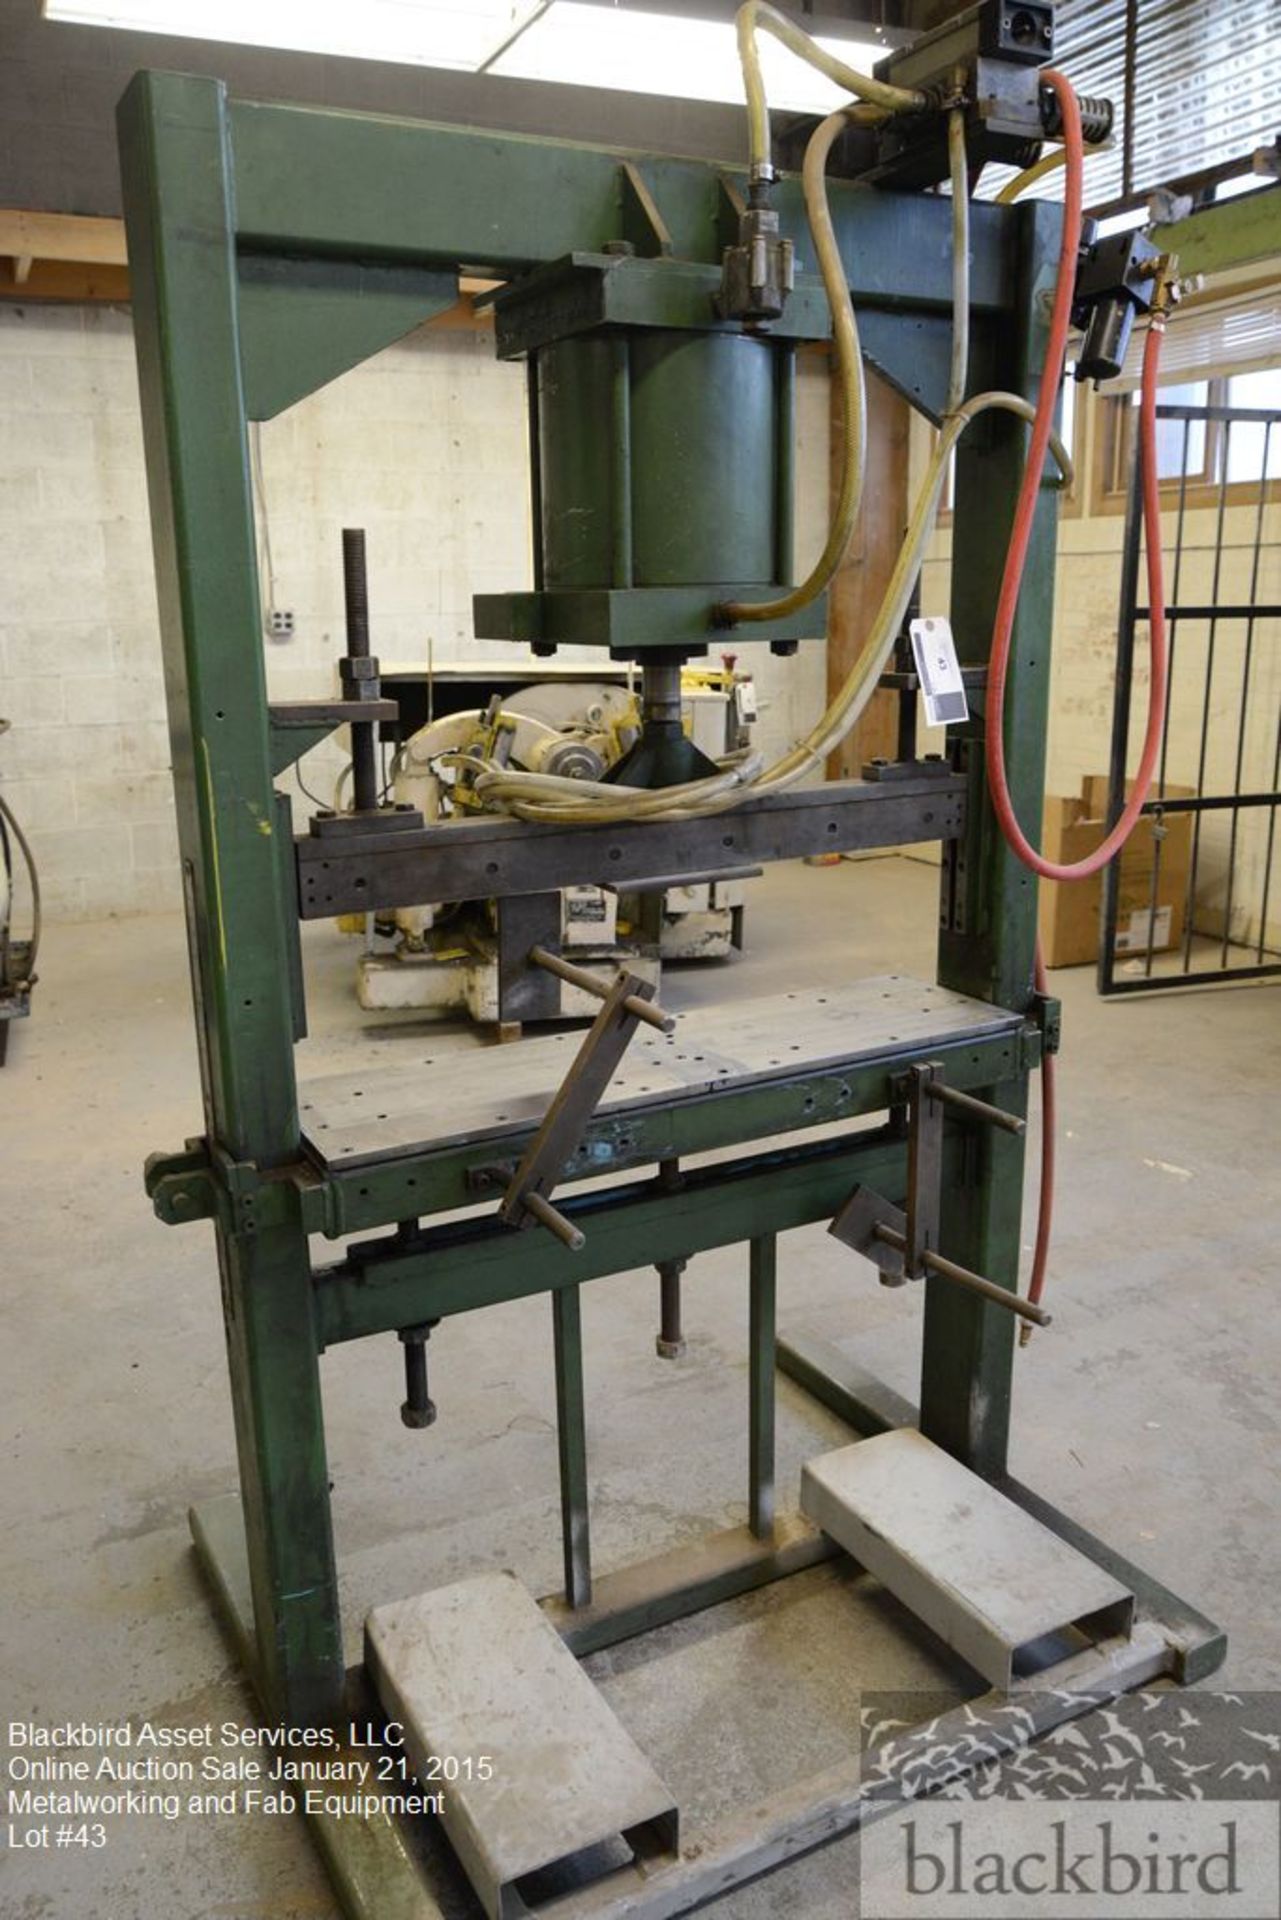 "H" frame shop press, 10" x 36" bed, 20" max opening